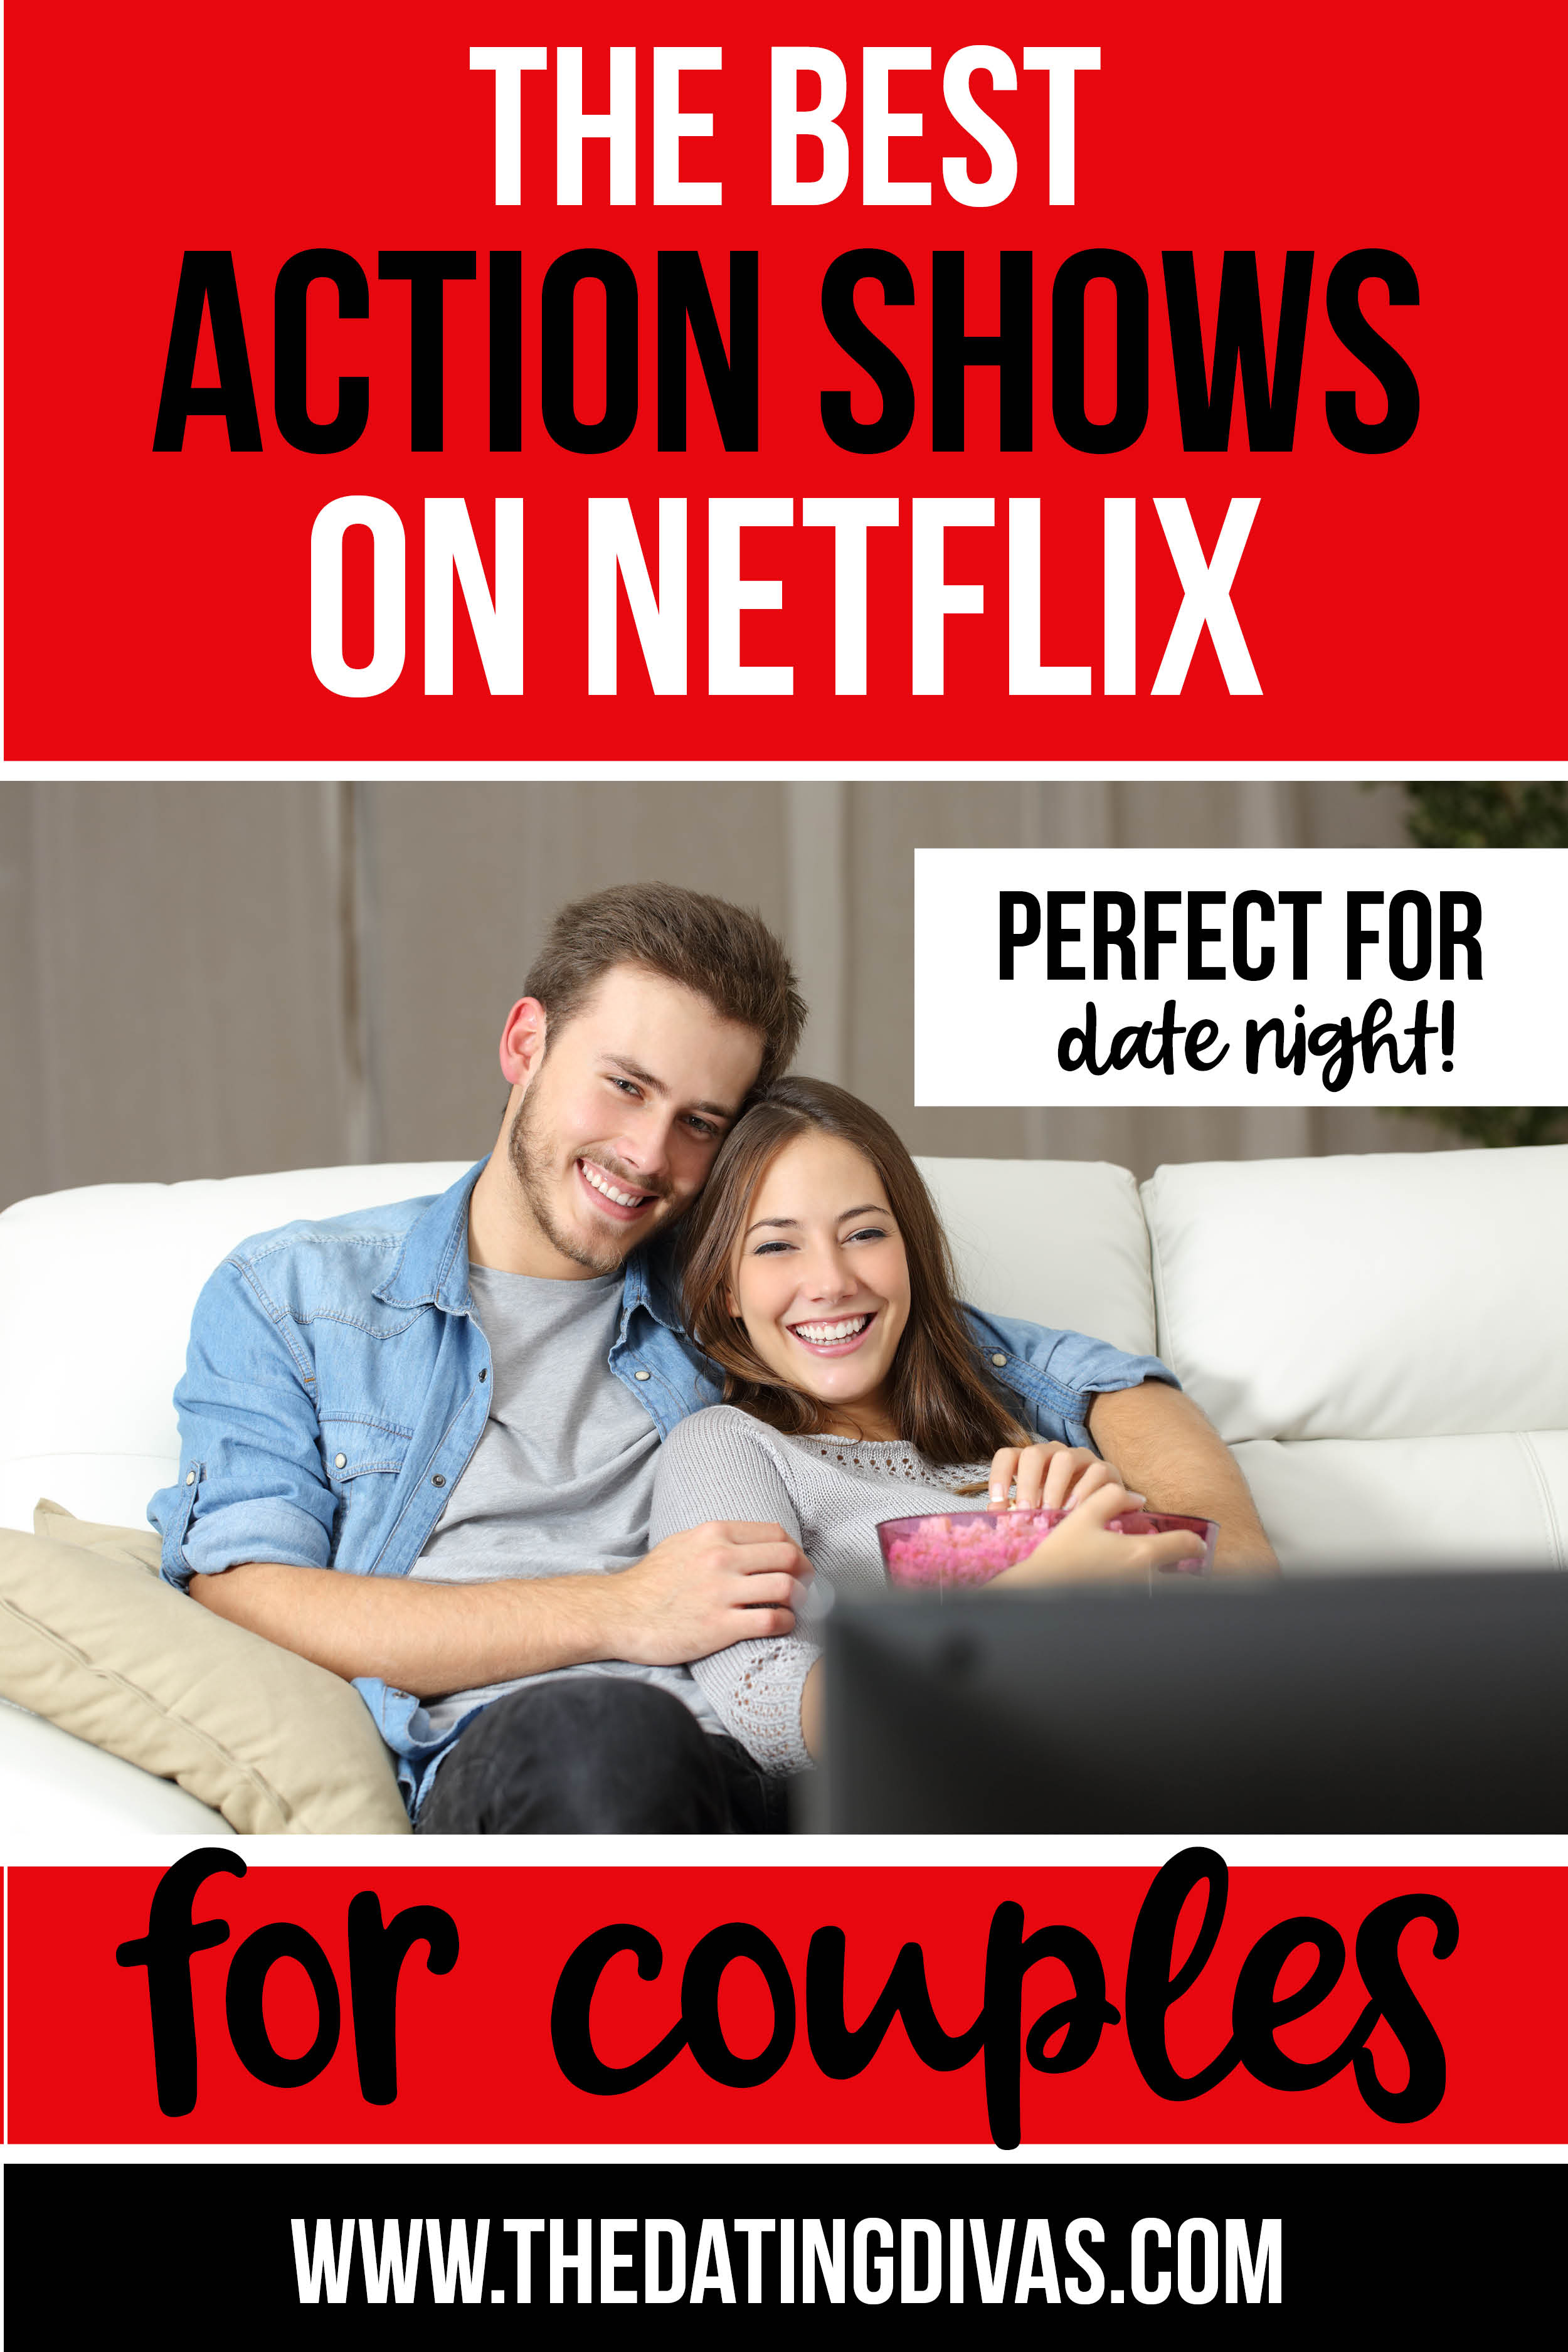 The very best action shows on Netflix - all in one place! If you are looking for a good series on Netflix check these out! They have the best suggestions for action tv shows for your next Netflix binge! #netflixaction #actionshows #netflixshows 